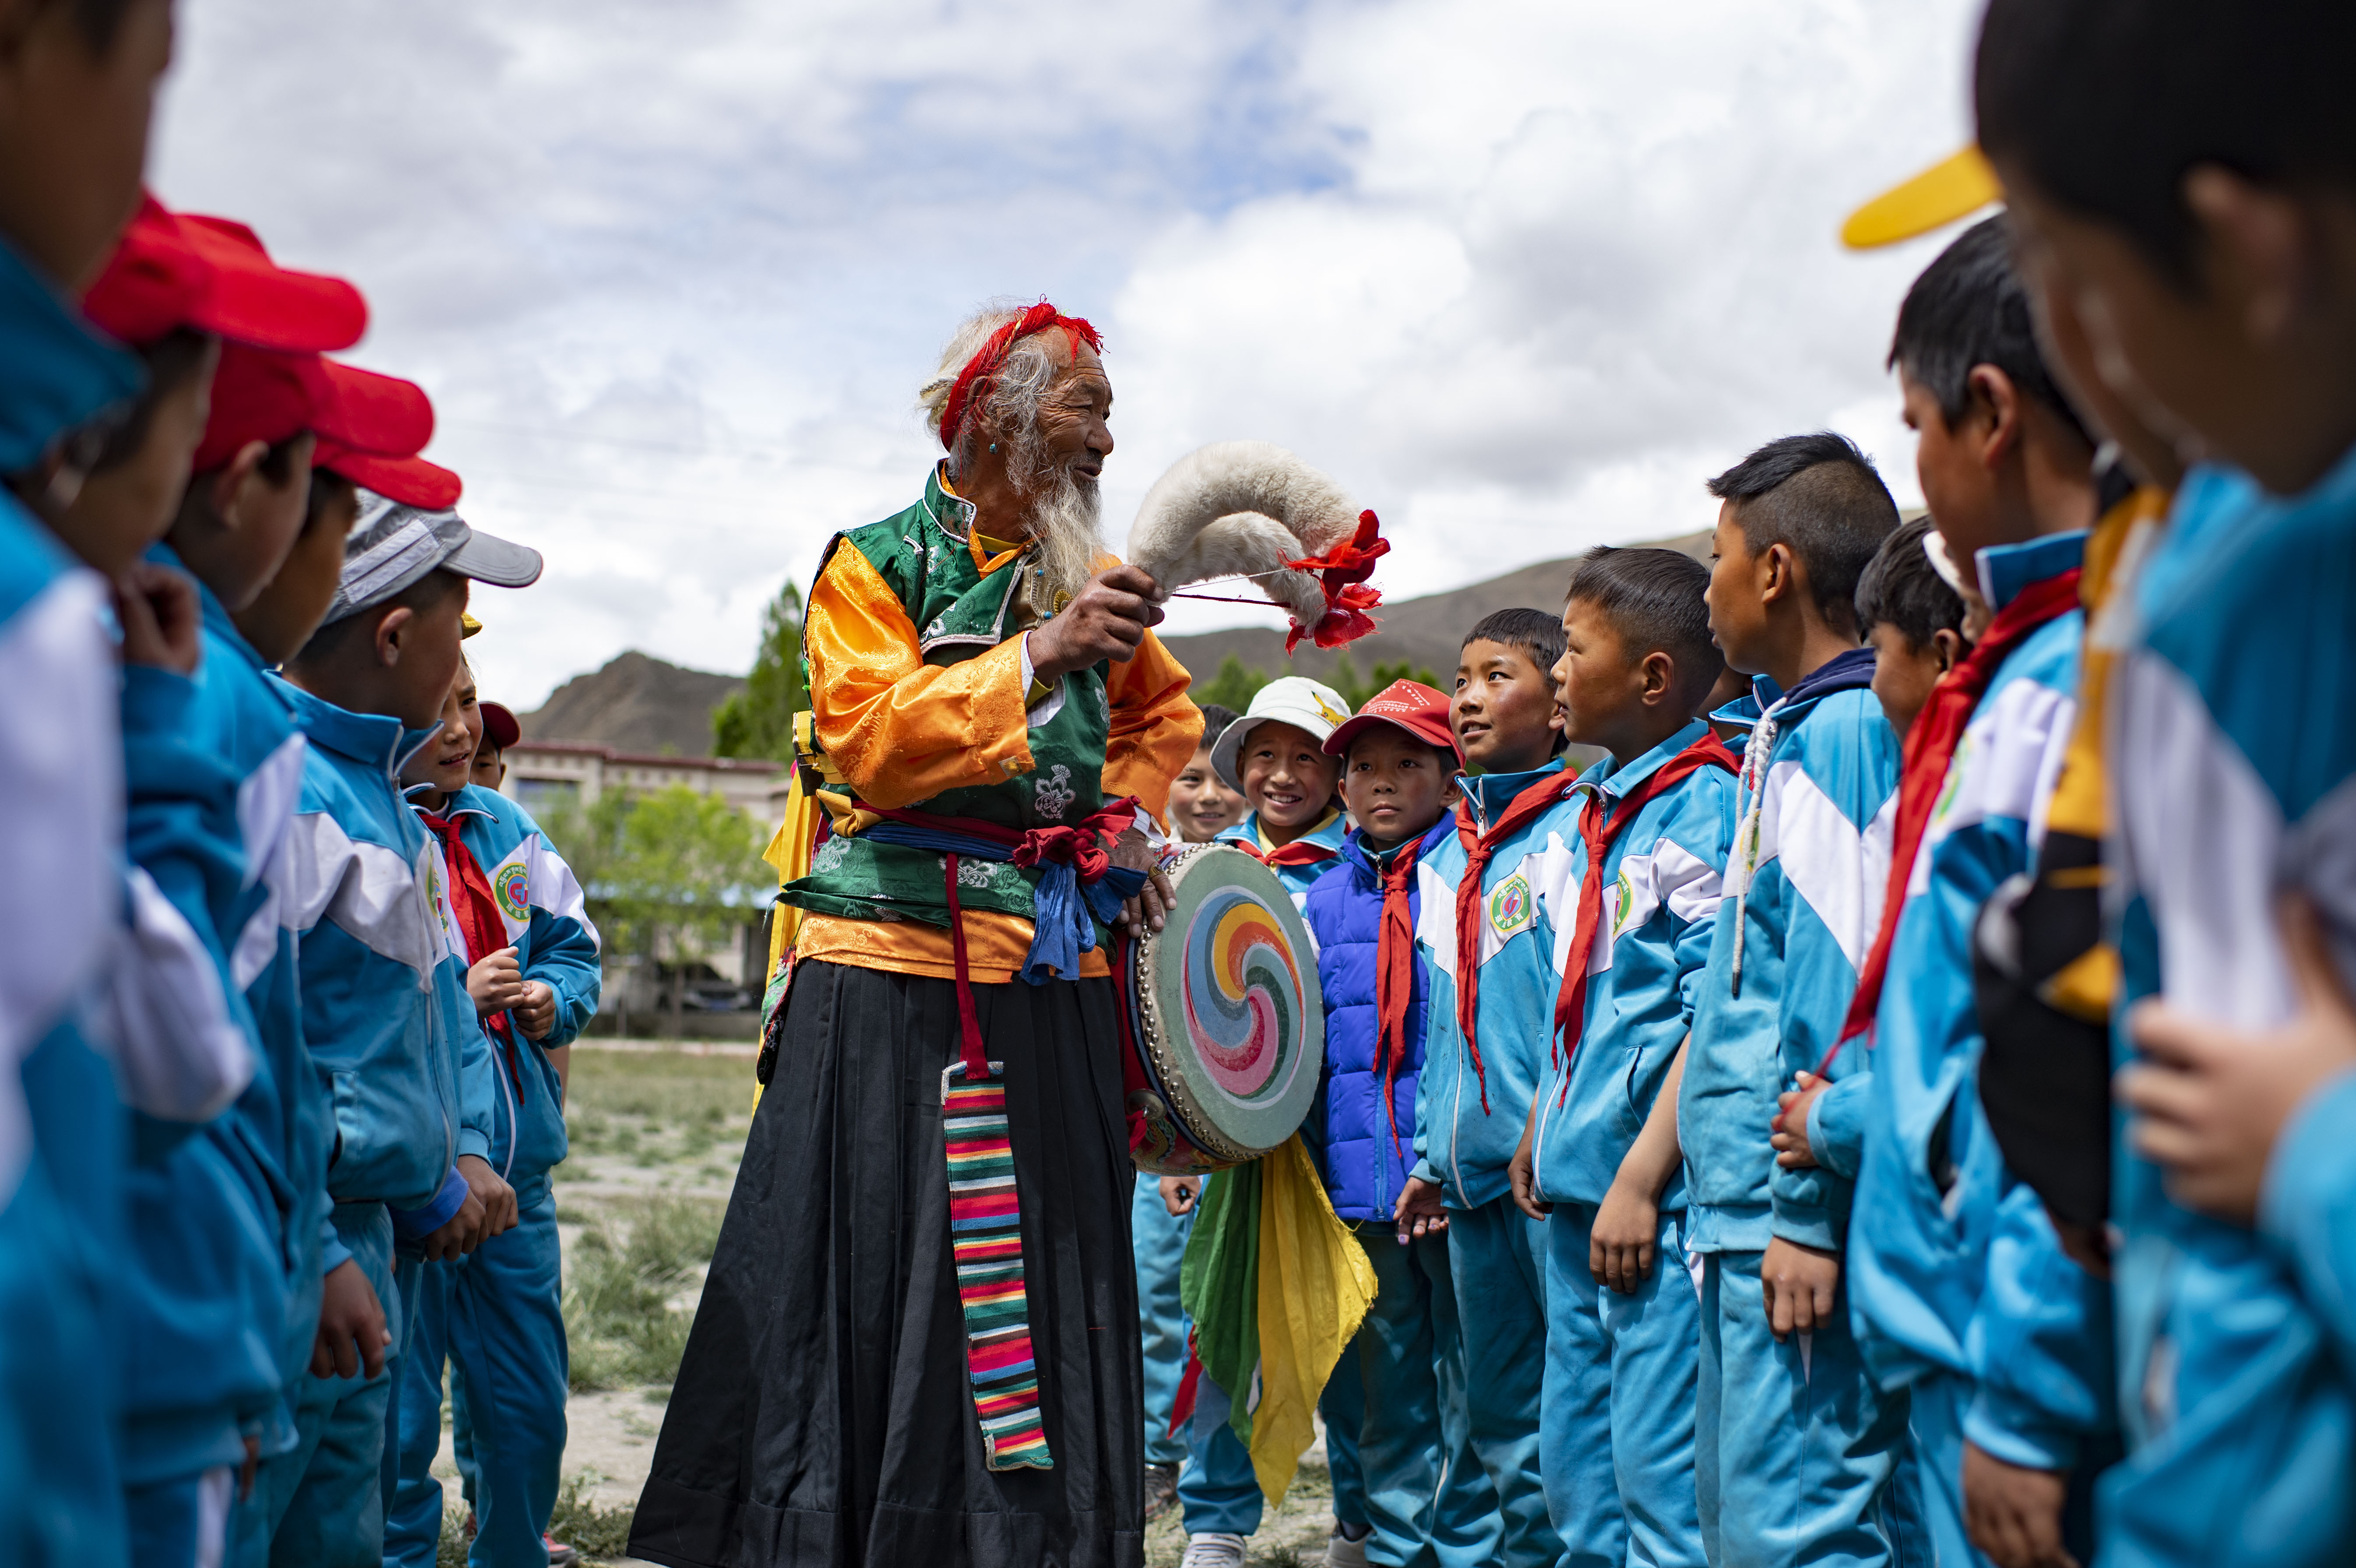 Nyima interacts with pupils at a primary school in Qonggyai County in Shannan, southwest China's Xizang Autonomous Region, China, July 2, 2020. /Xinhua